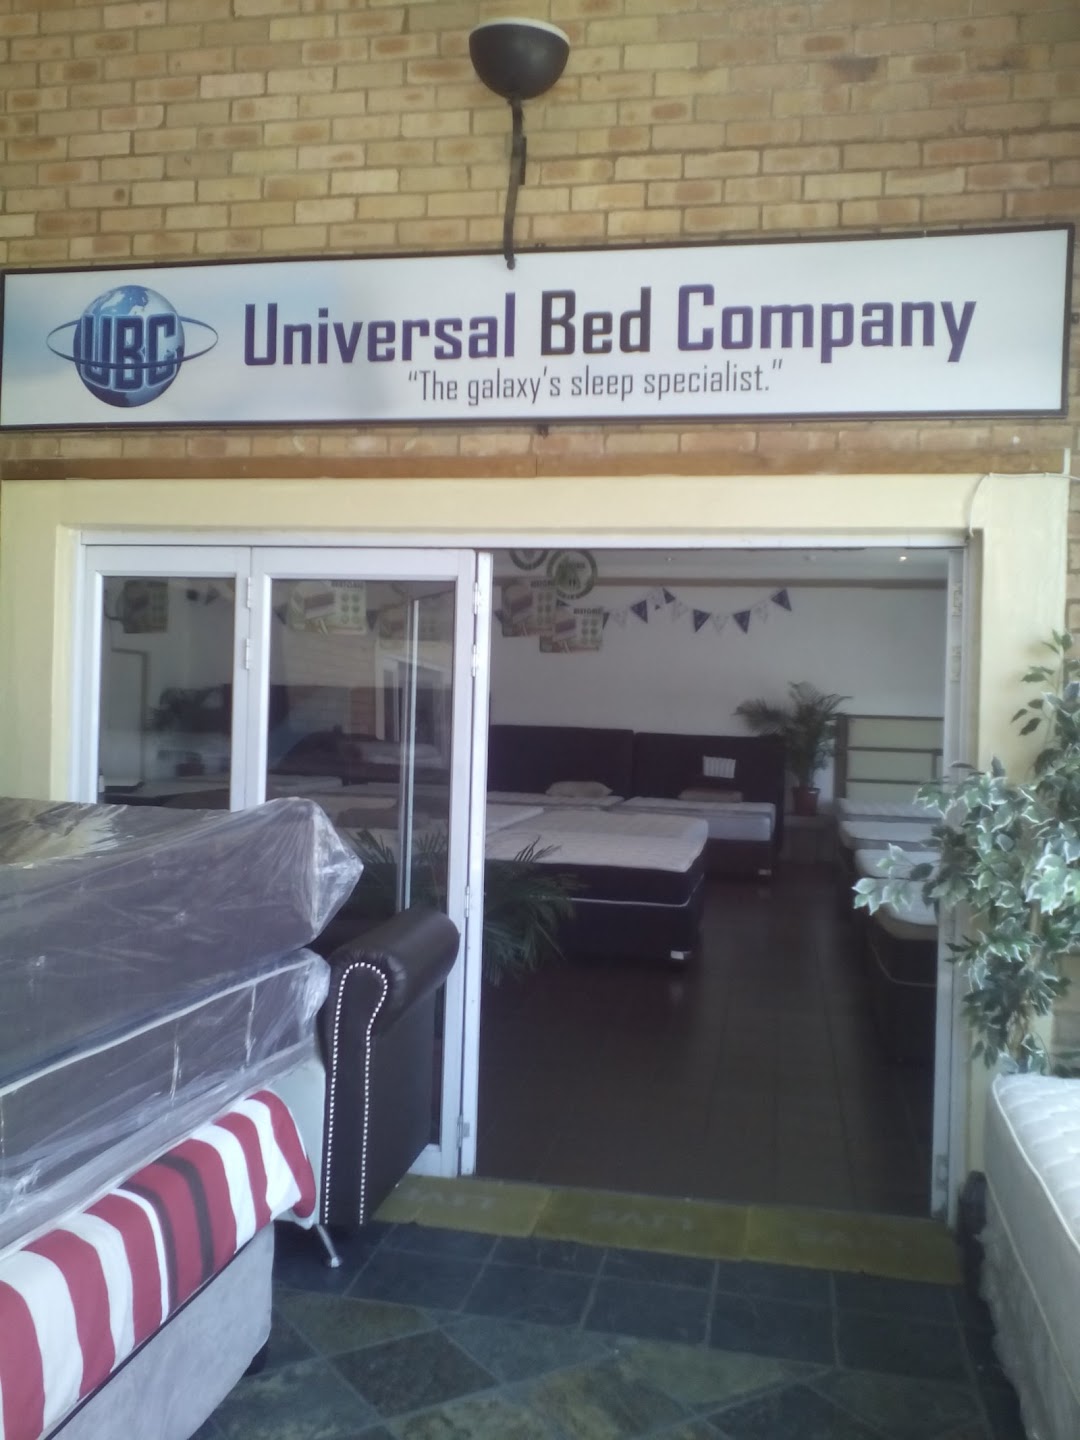 Universal Bed Company